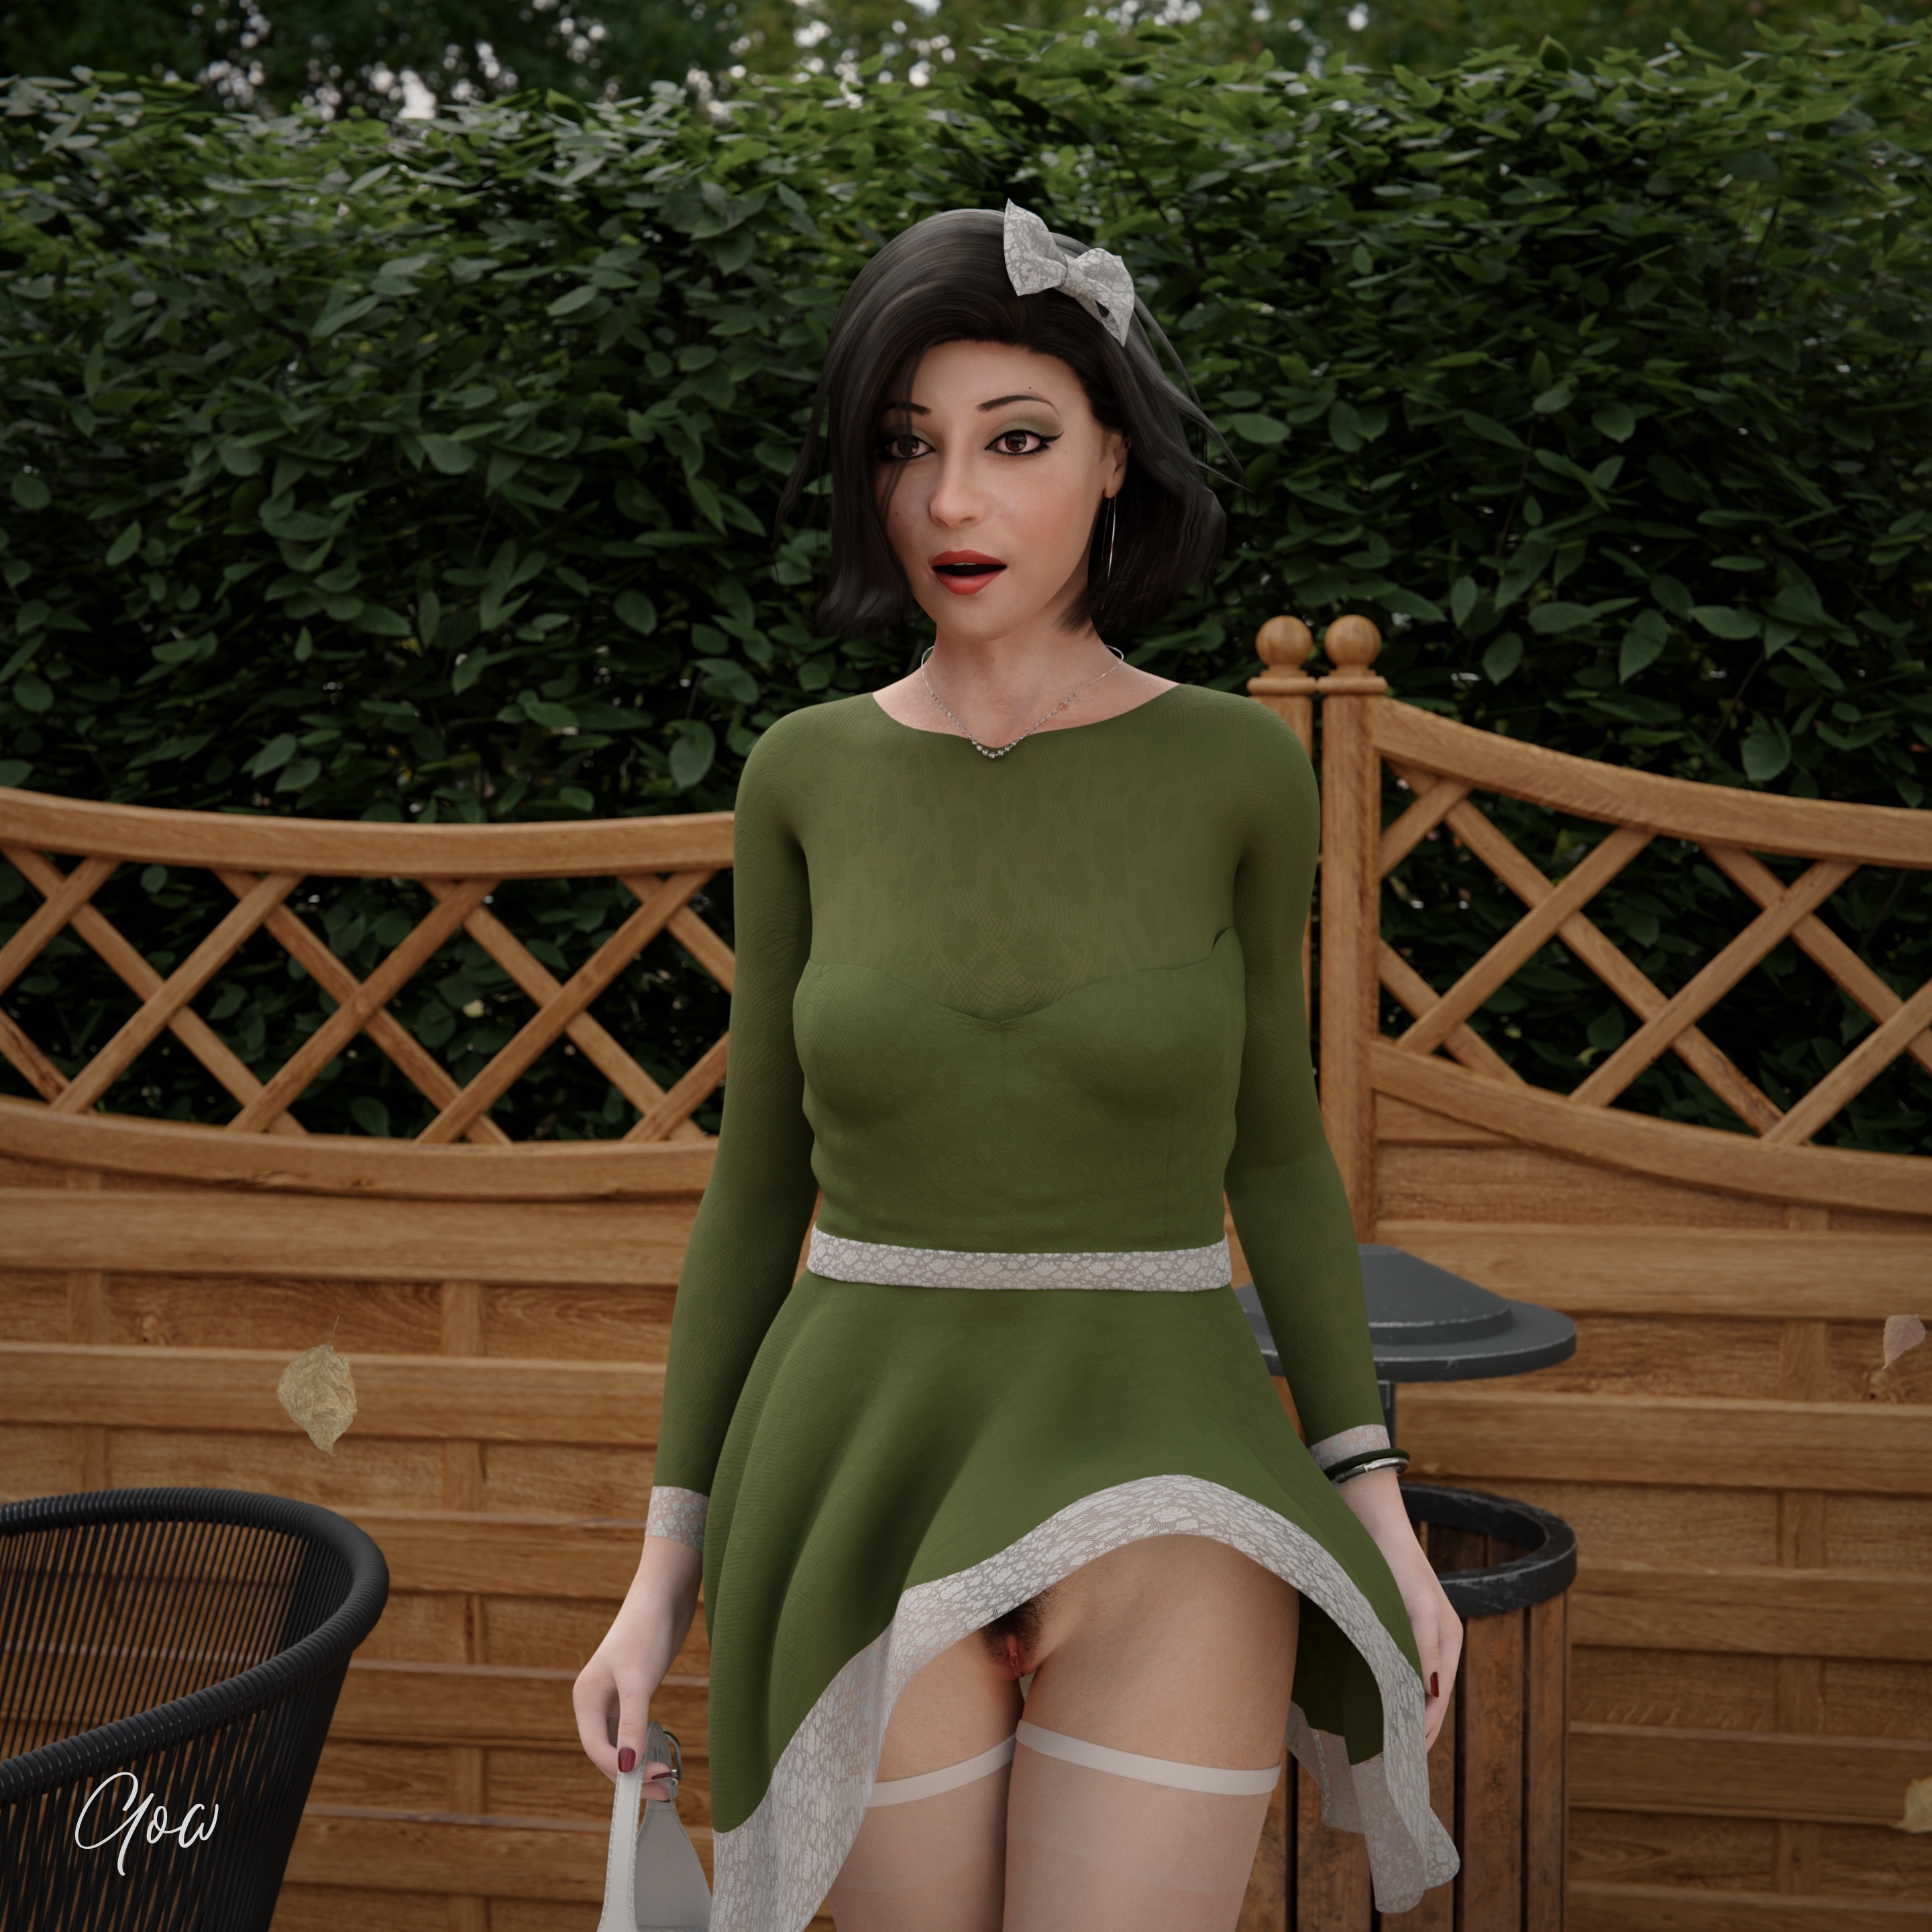 Rona in Greencaffe pt2 (Windy days) White Ballerina Cosplay Nylon Milf Clothed Upskirt Wet Pussy Story Legs Spread Legs Tease Photorealistic No Panties Dress Partially_clothed Outdoor Party Dress Lifted_skirt Skirt Original Character 13